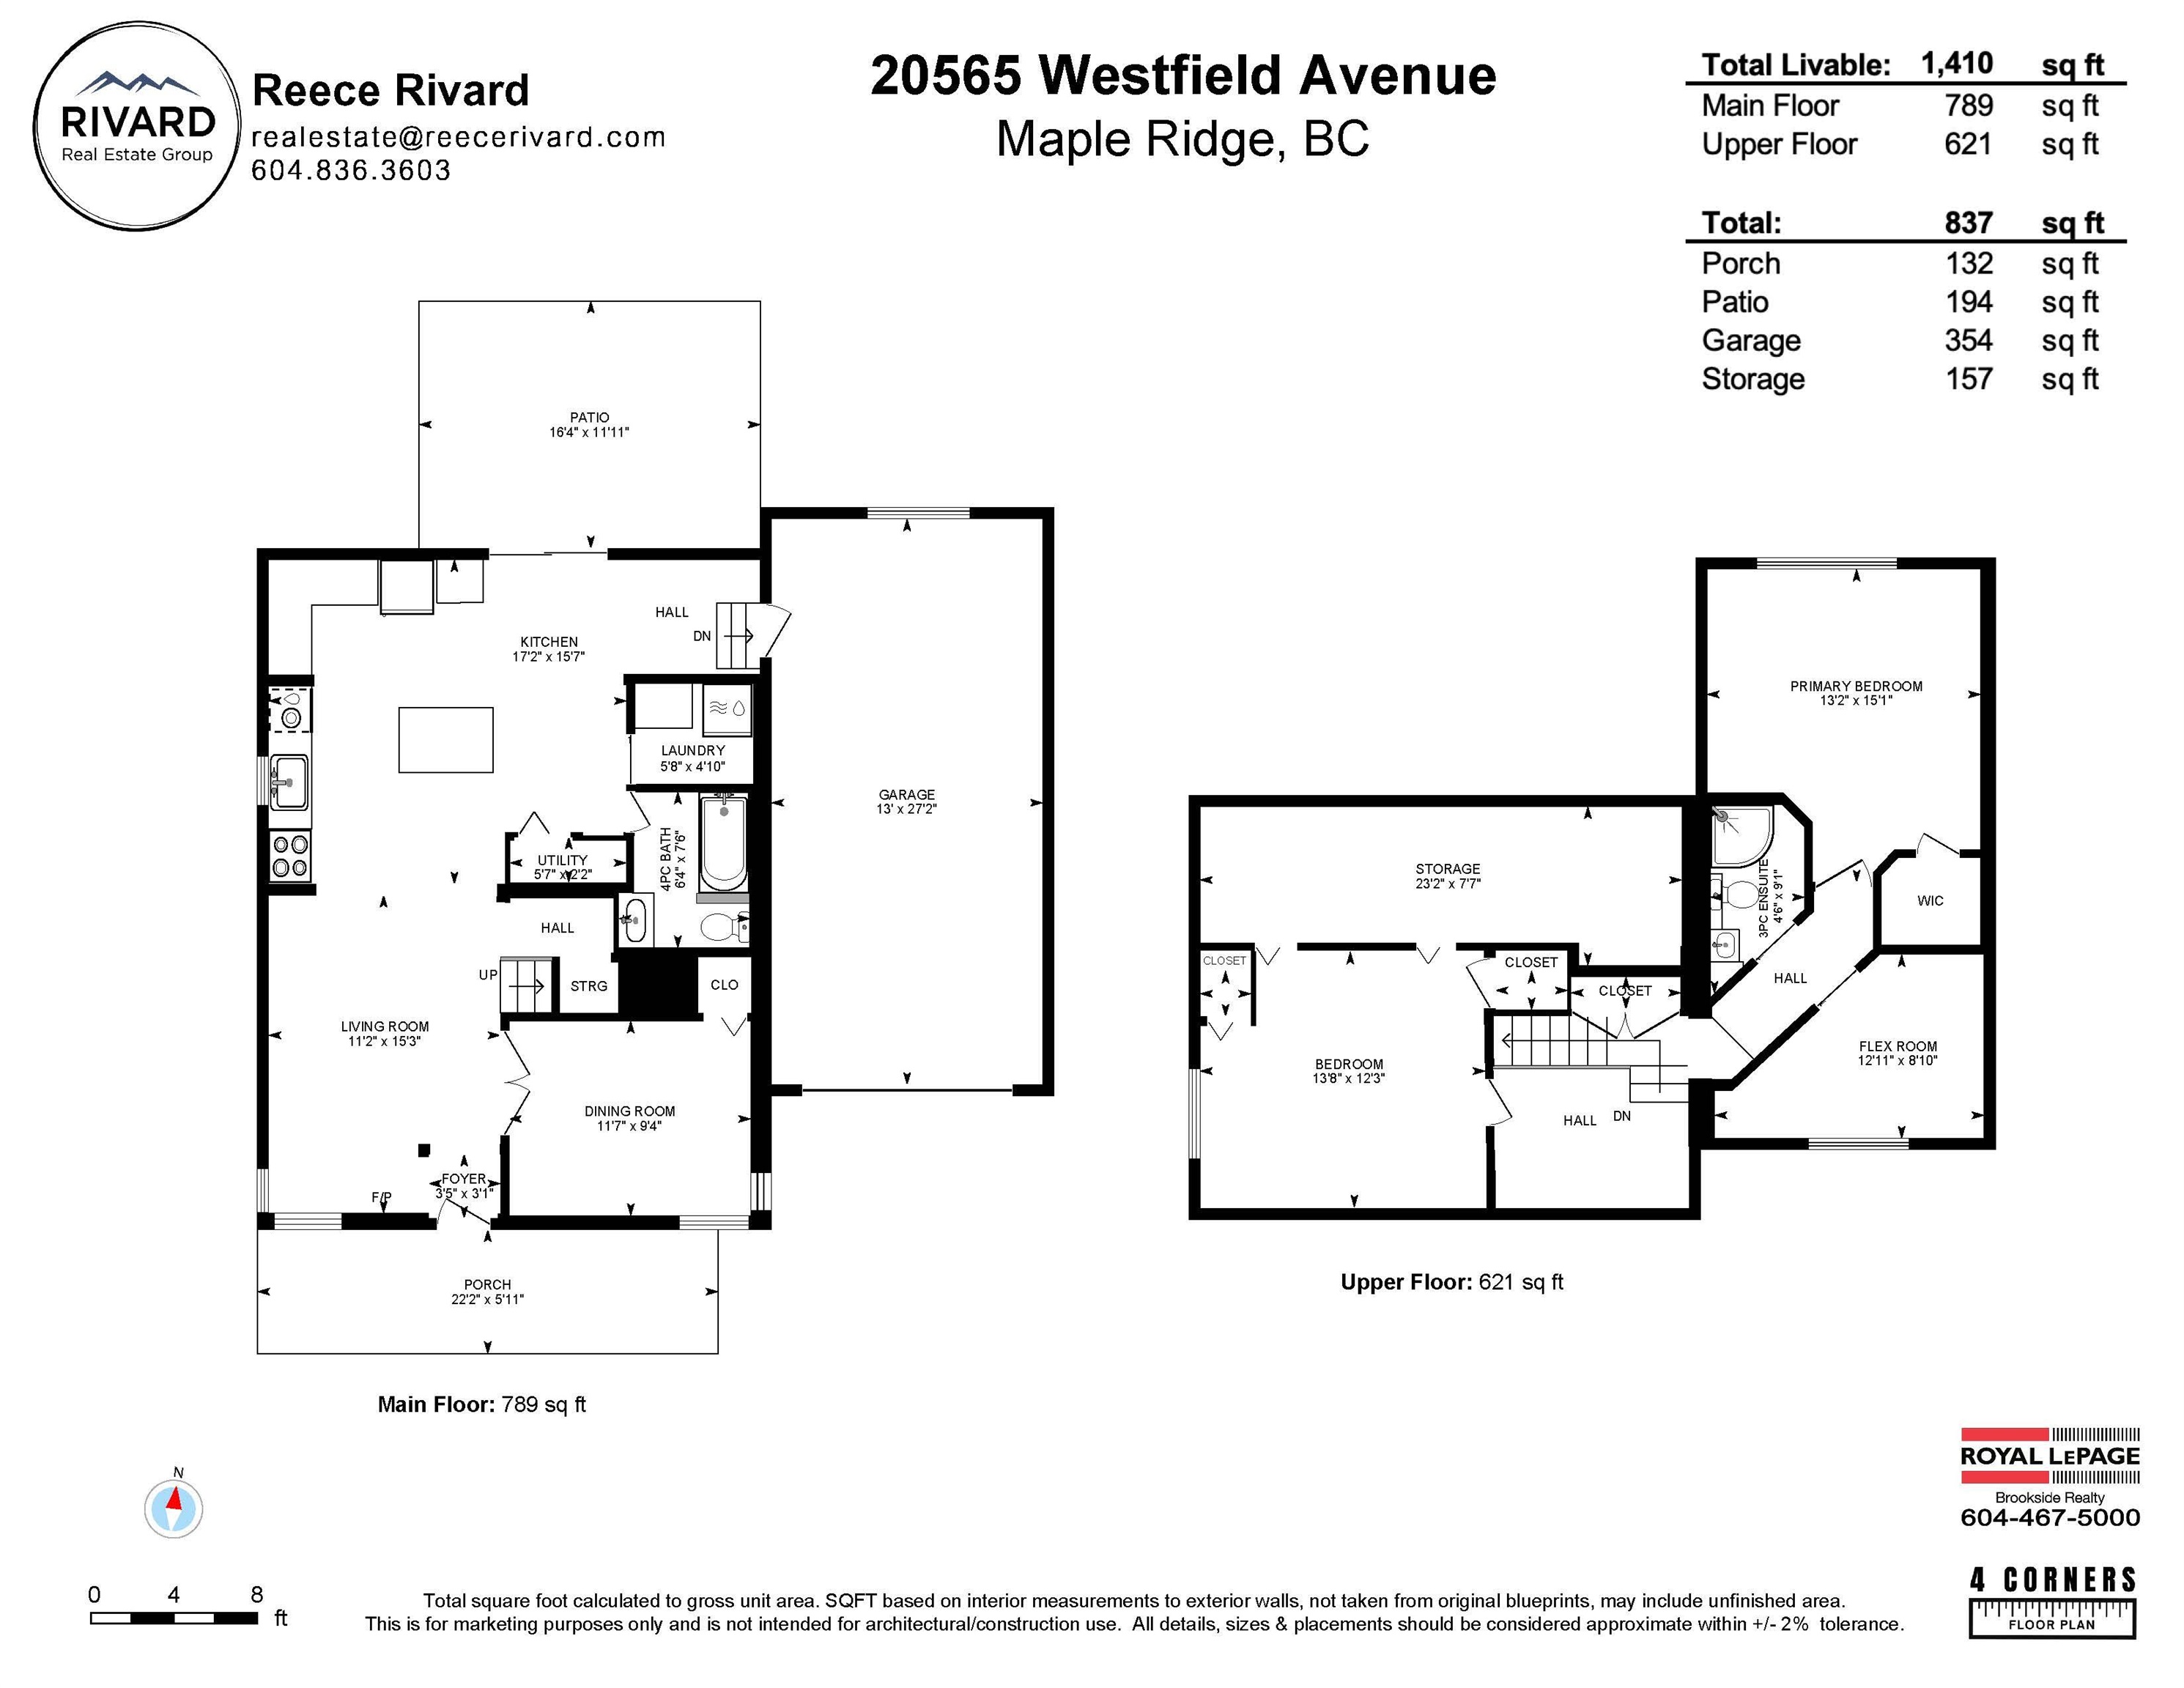 Listing image of 20565 WESTFIELD AVENUE